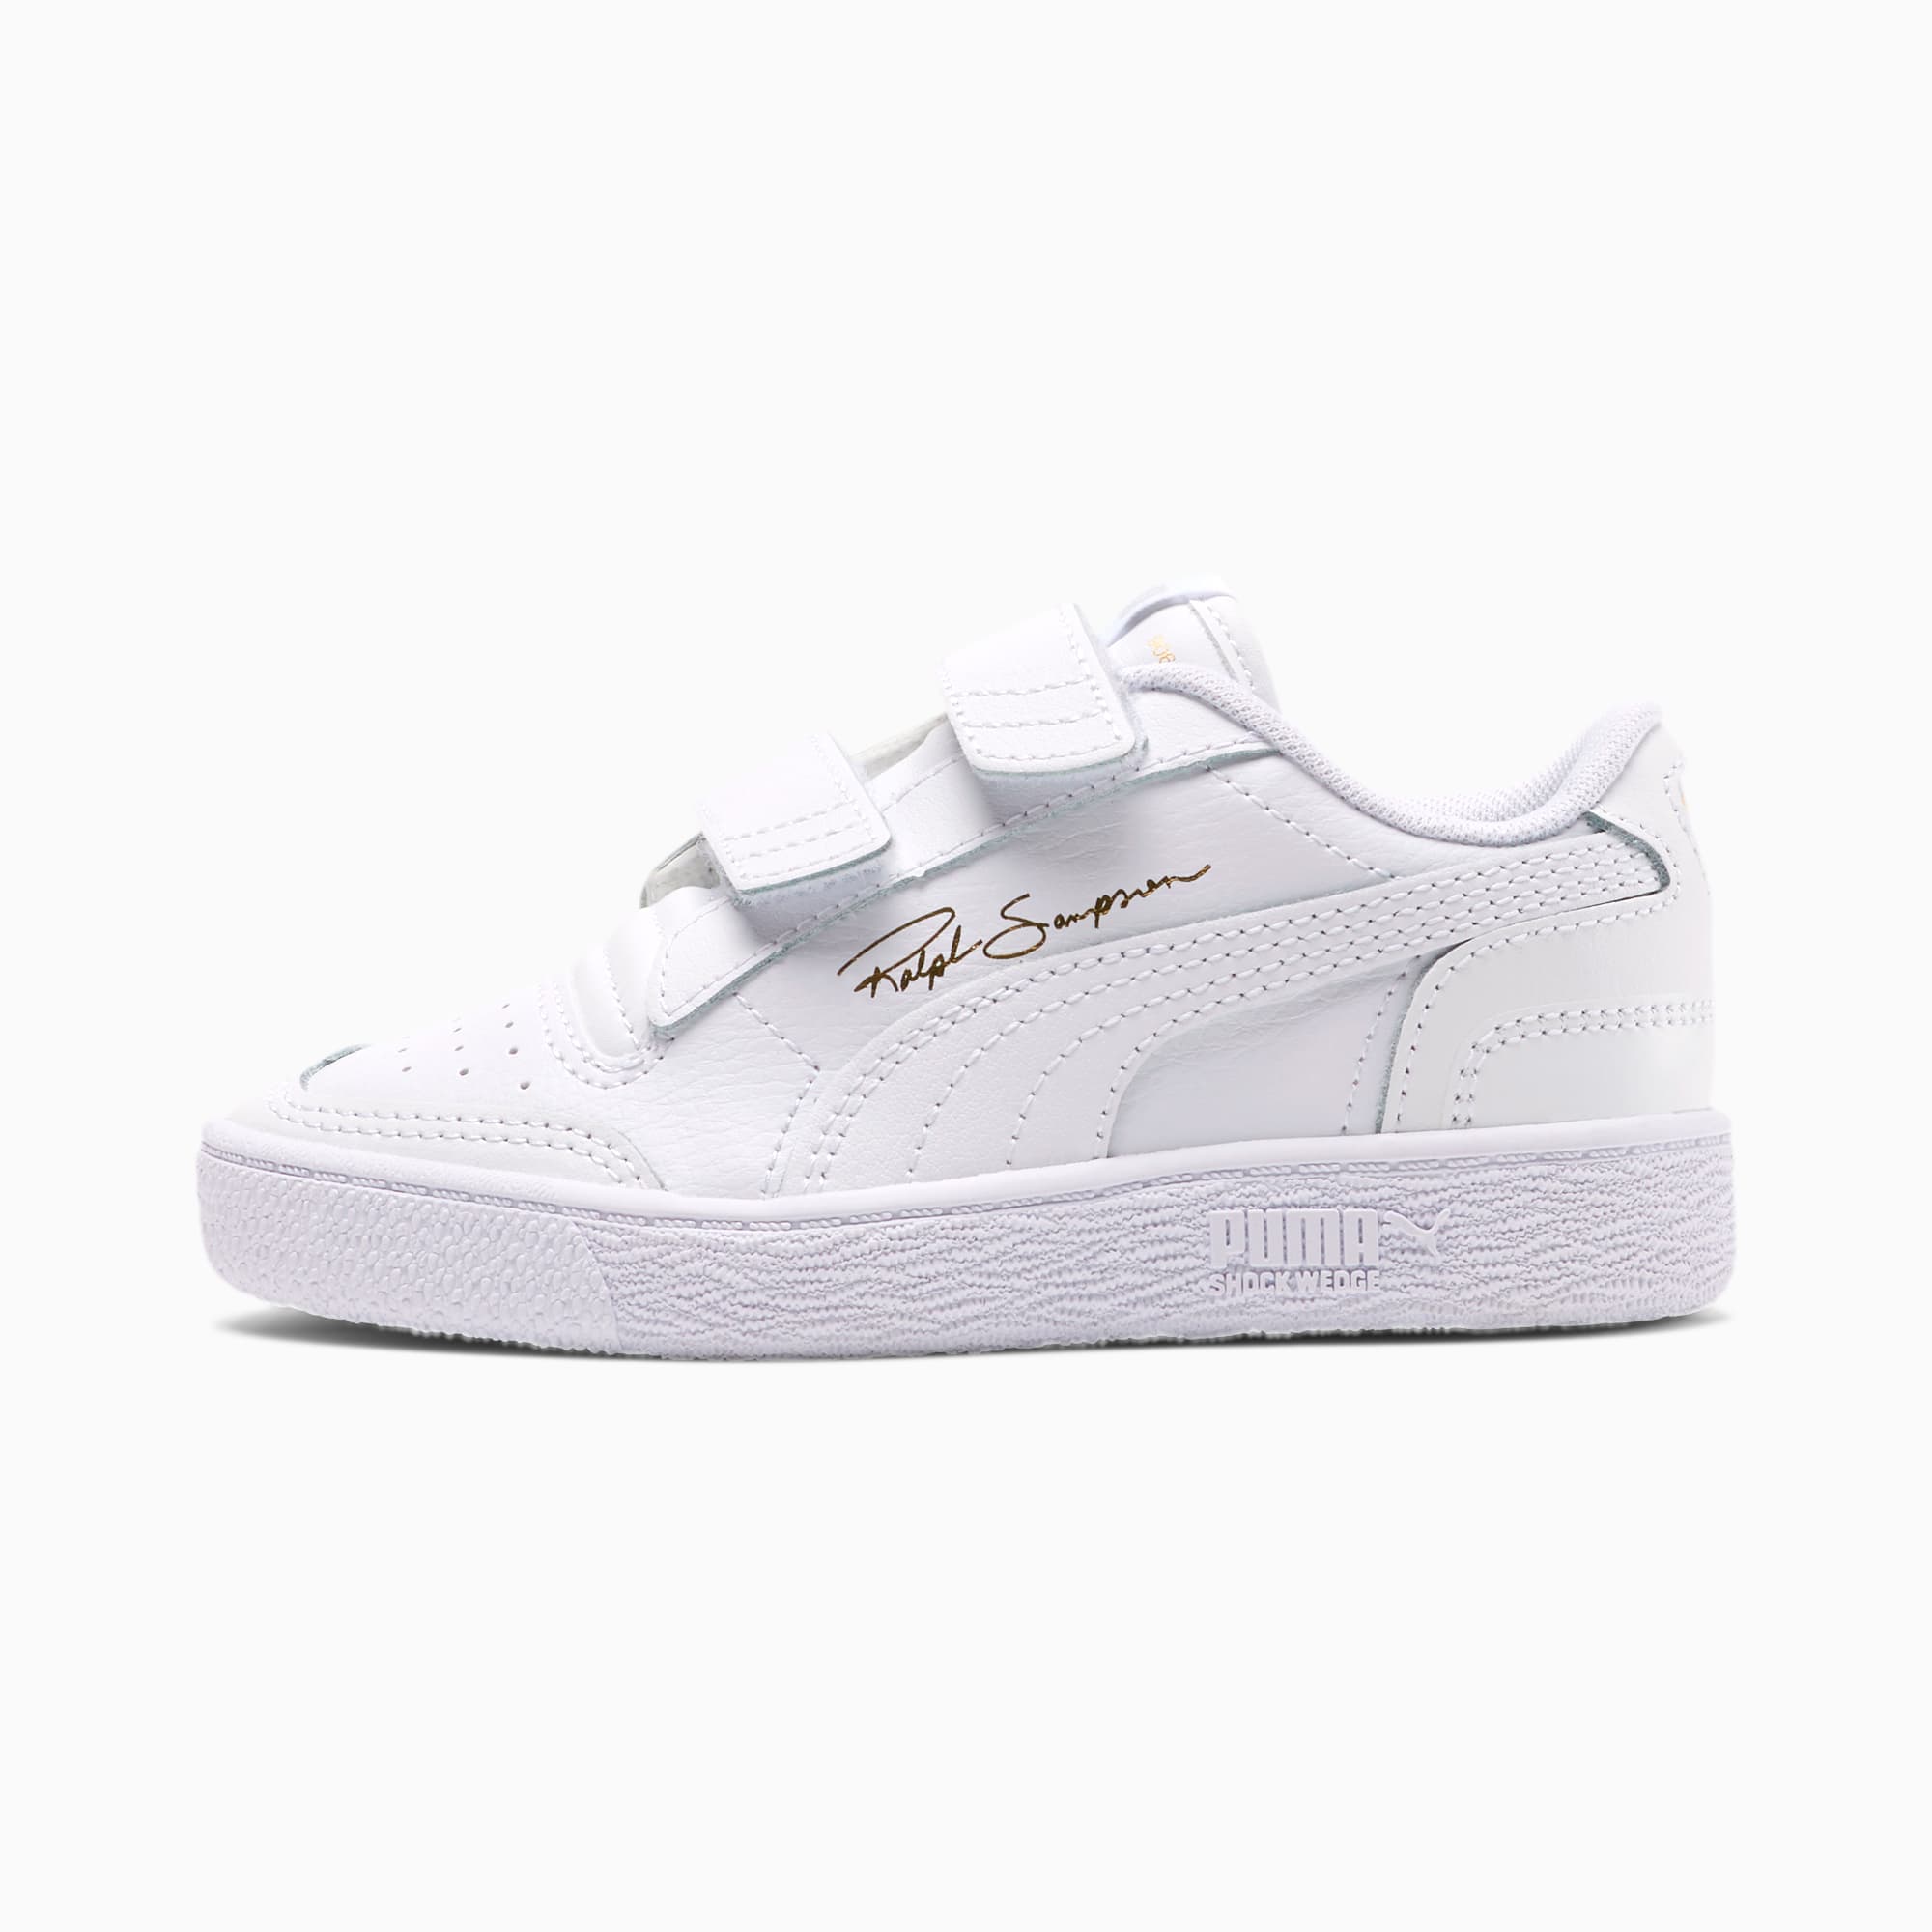 PUMA Chaussure Ralph Sampson Lo V kindersneakers pour Enfant, Blanc, Taille 28, Chaussures